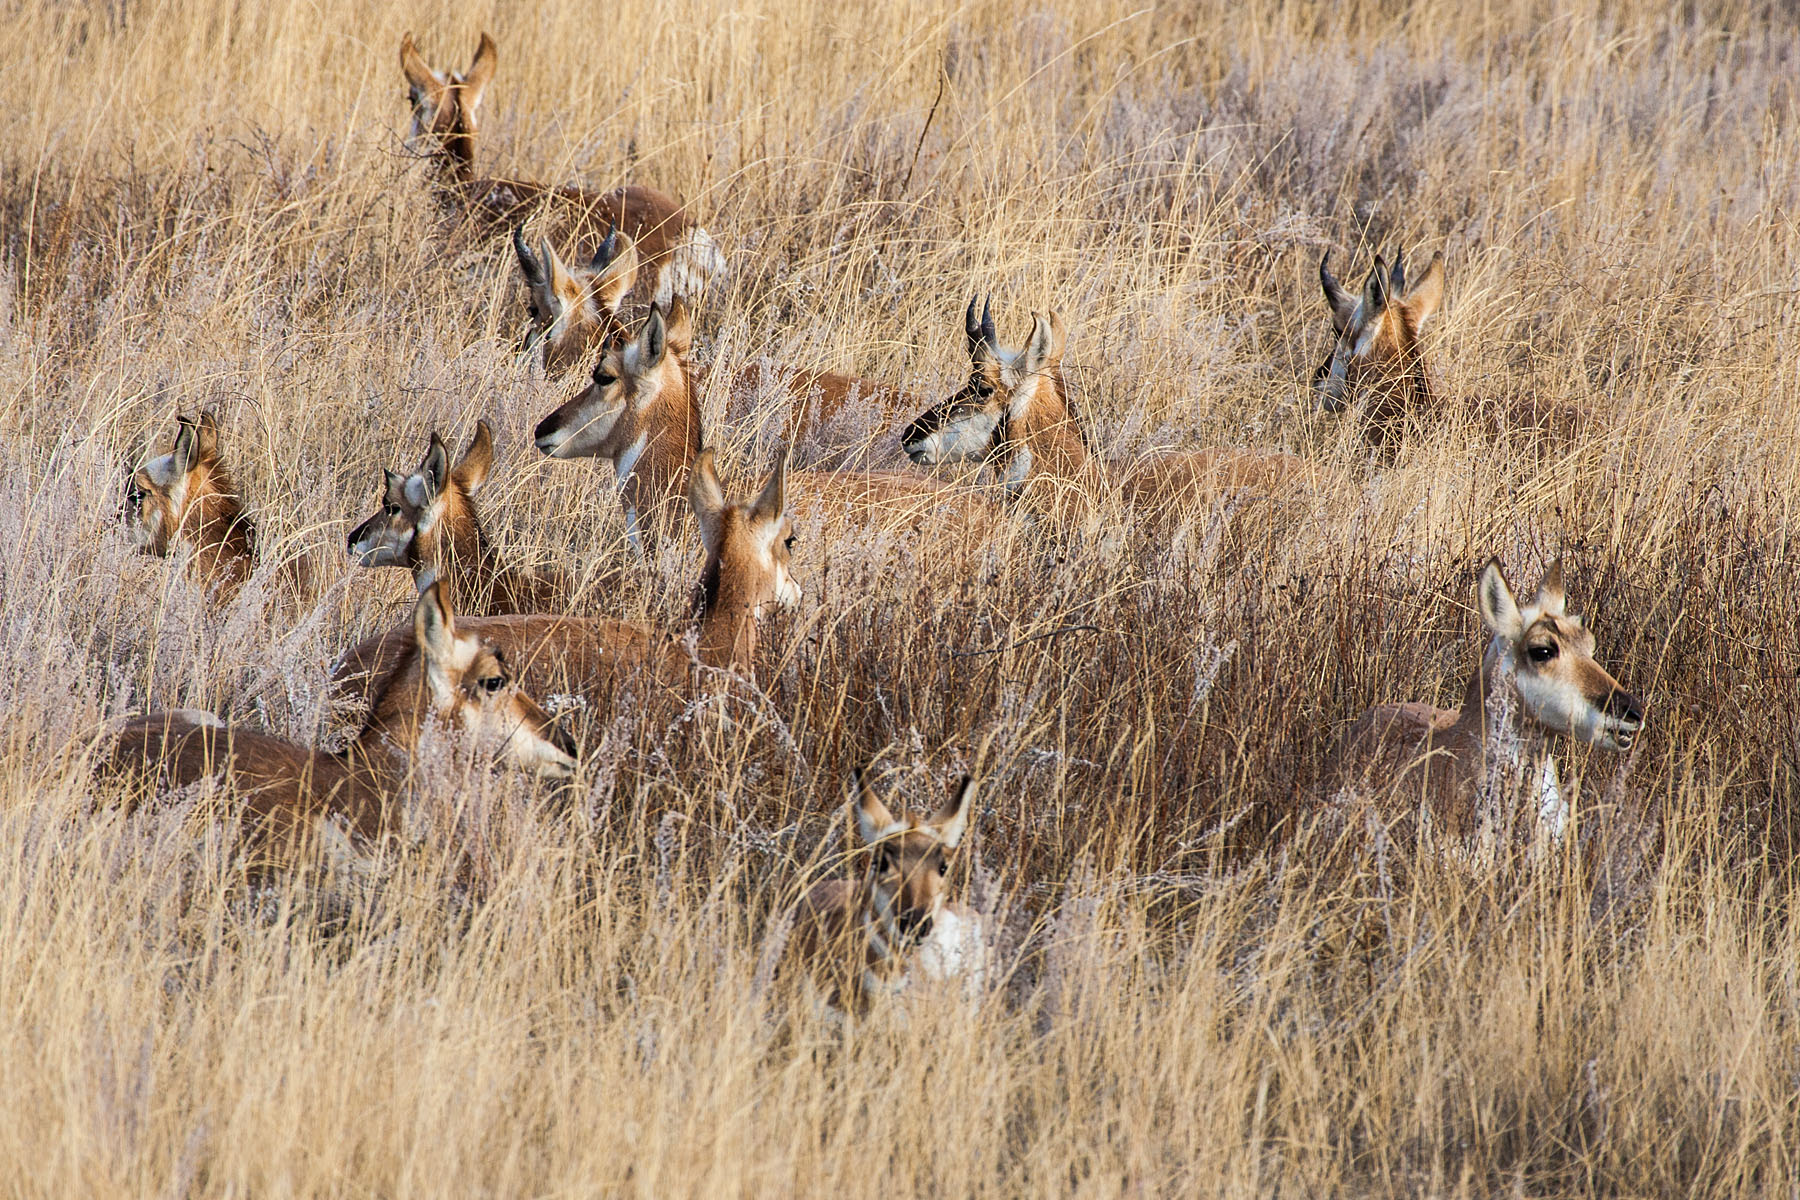 Pronghorns among the grass, Custer State Park.  Click for next photo.